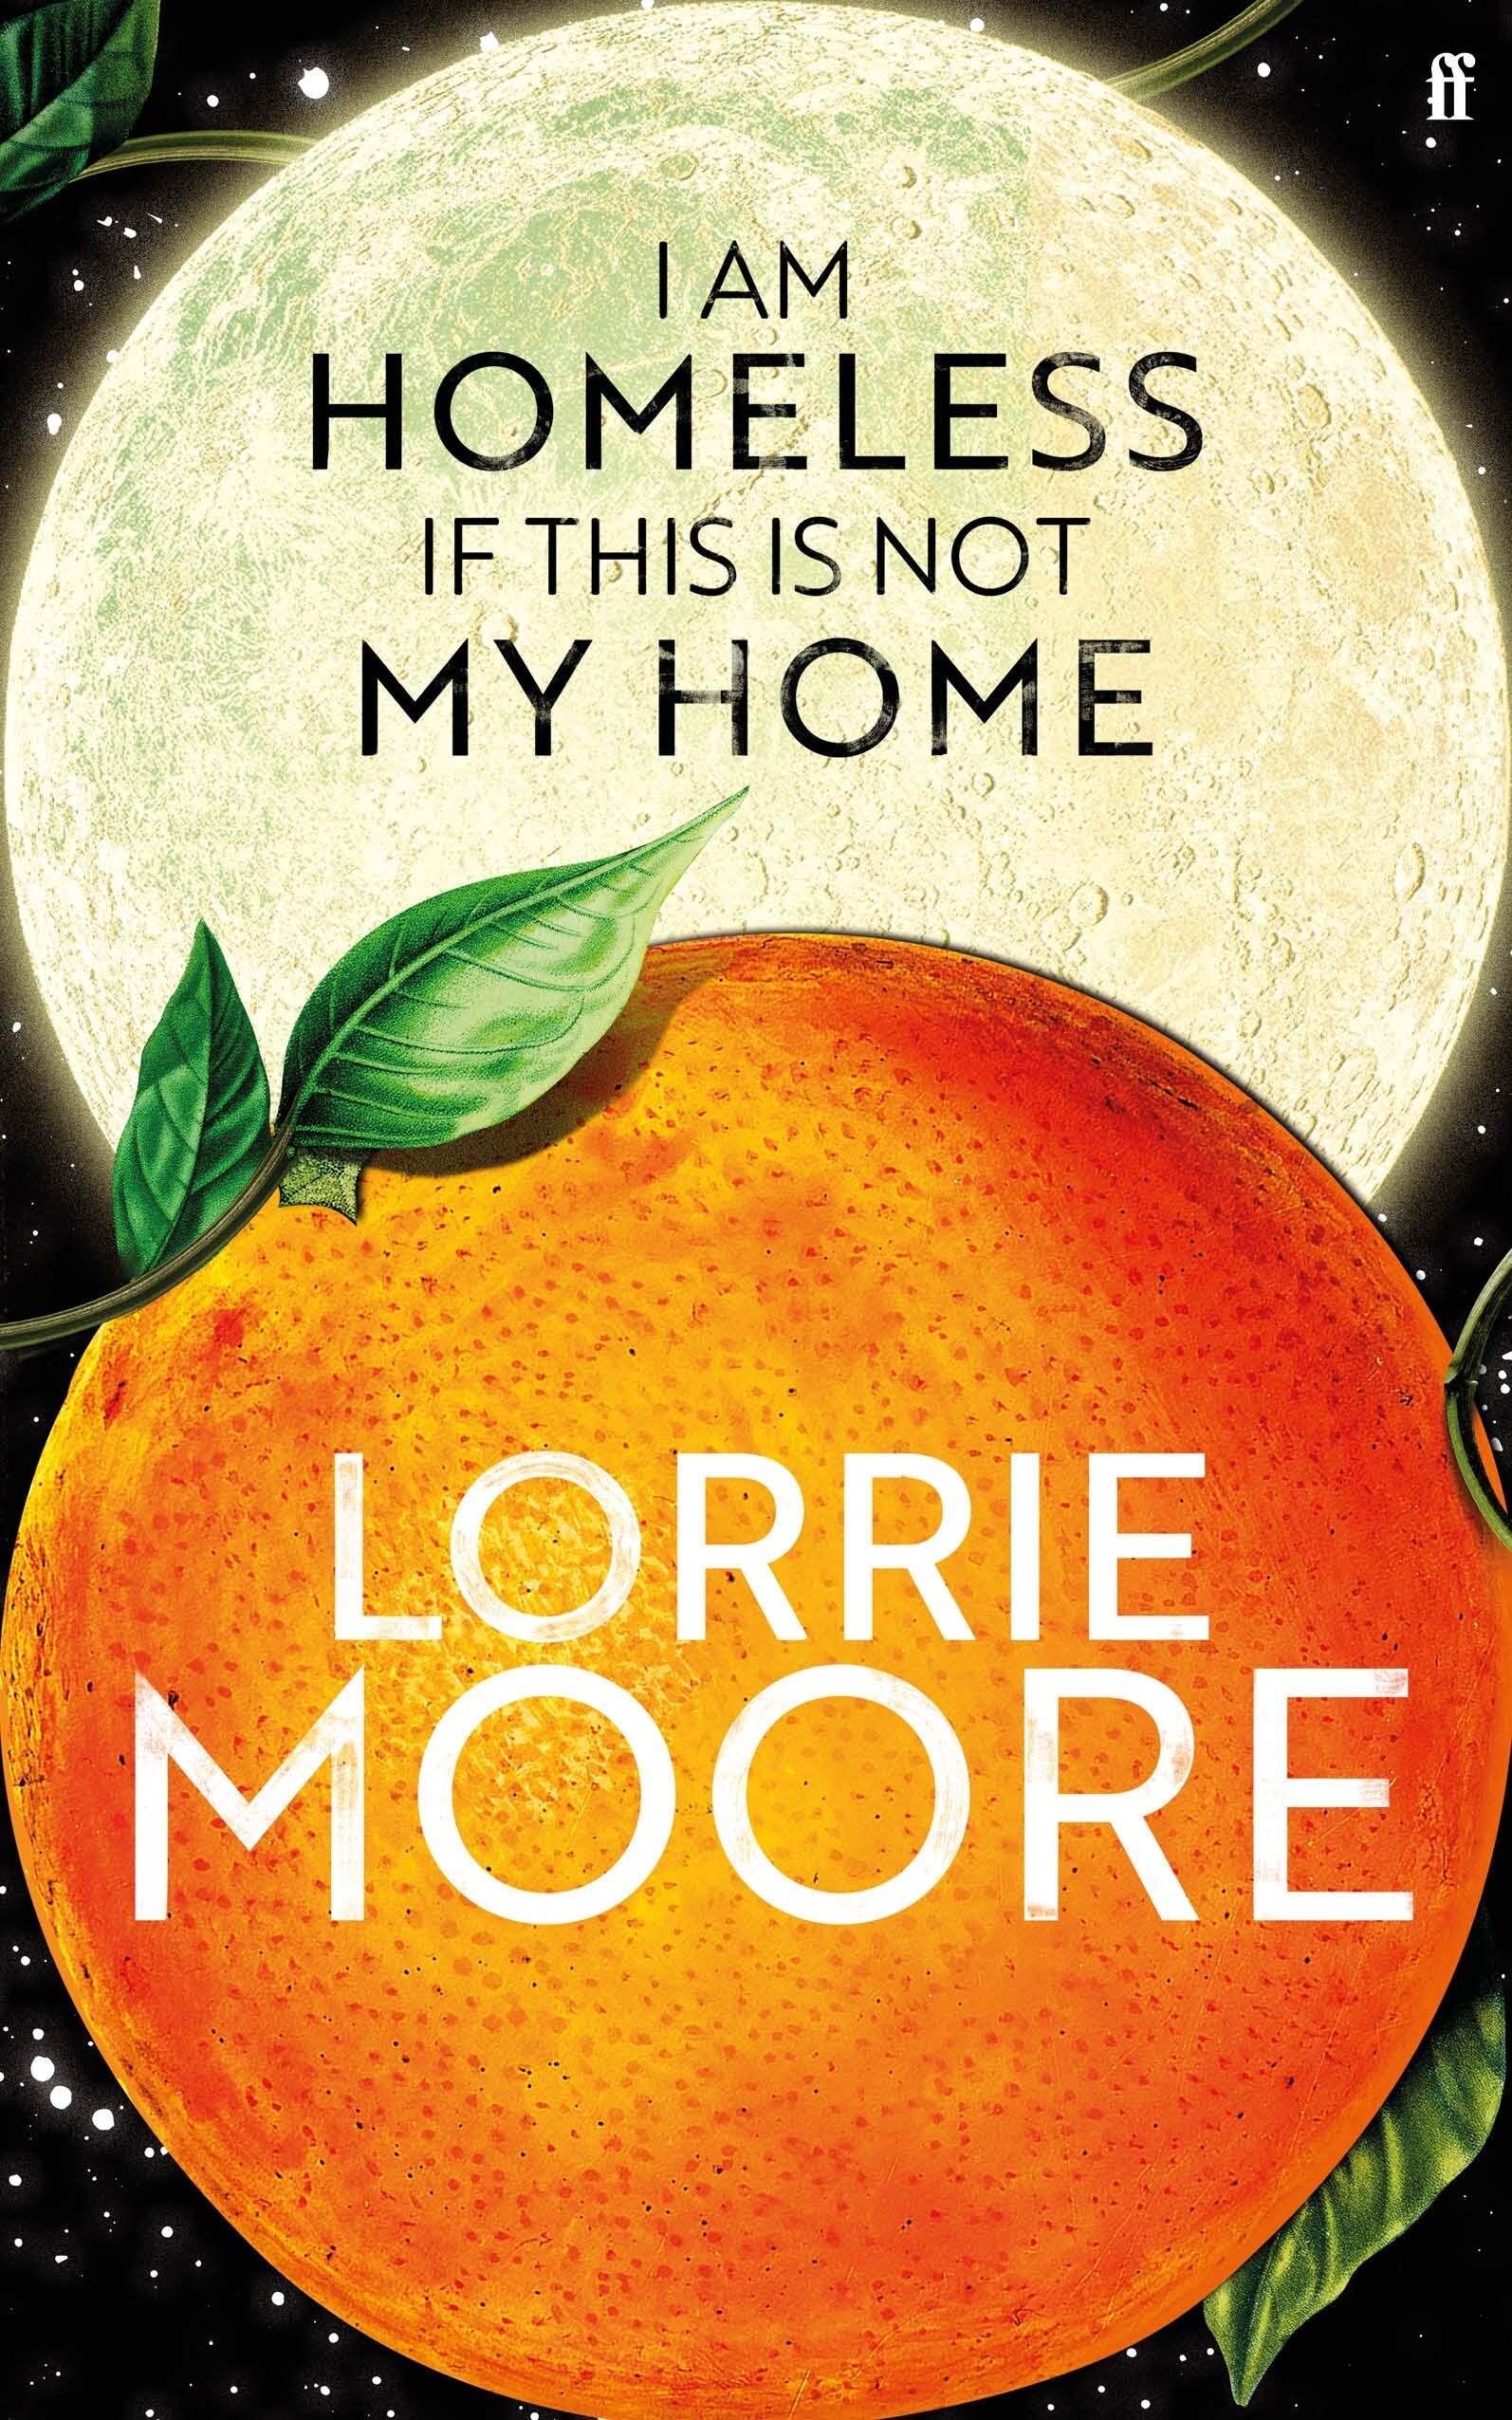 A book cover showing an orange with a green leaf at the top in front of a full moon